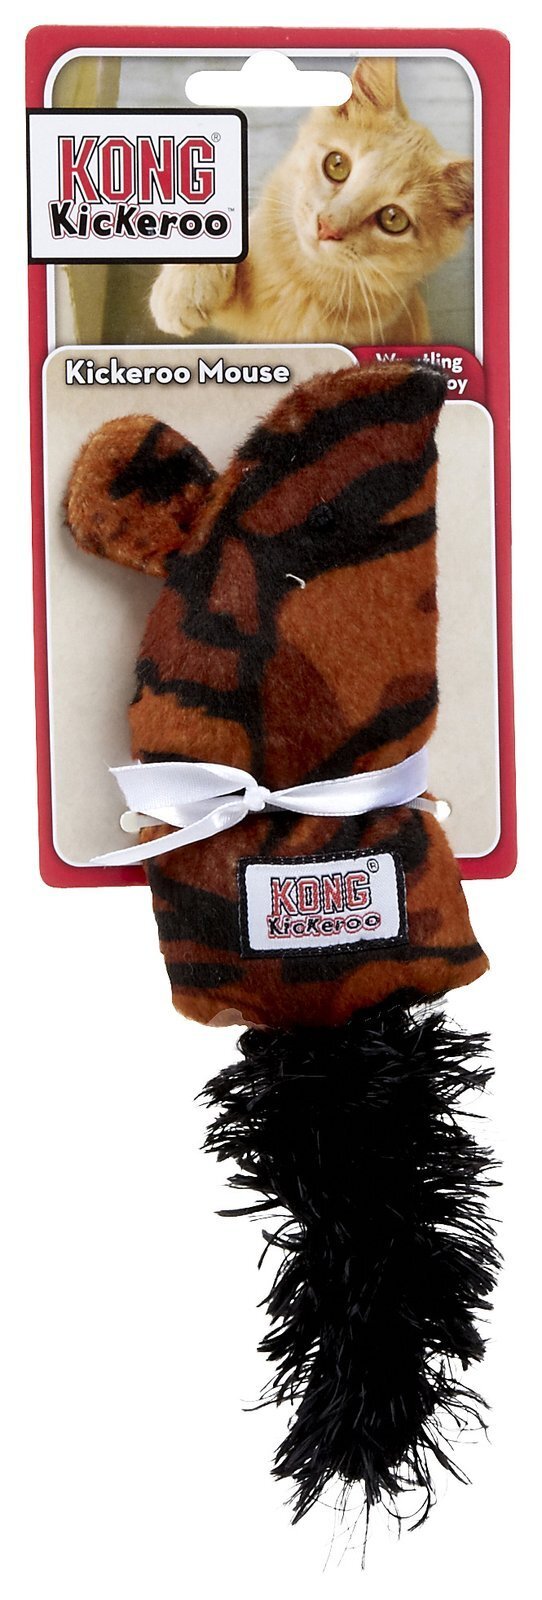 KONG Kickeroo Mouse North American Catnip Cat Toy - 3 Unit/s image 2